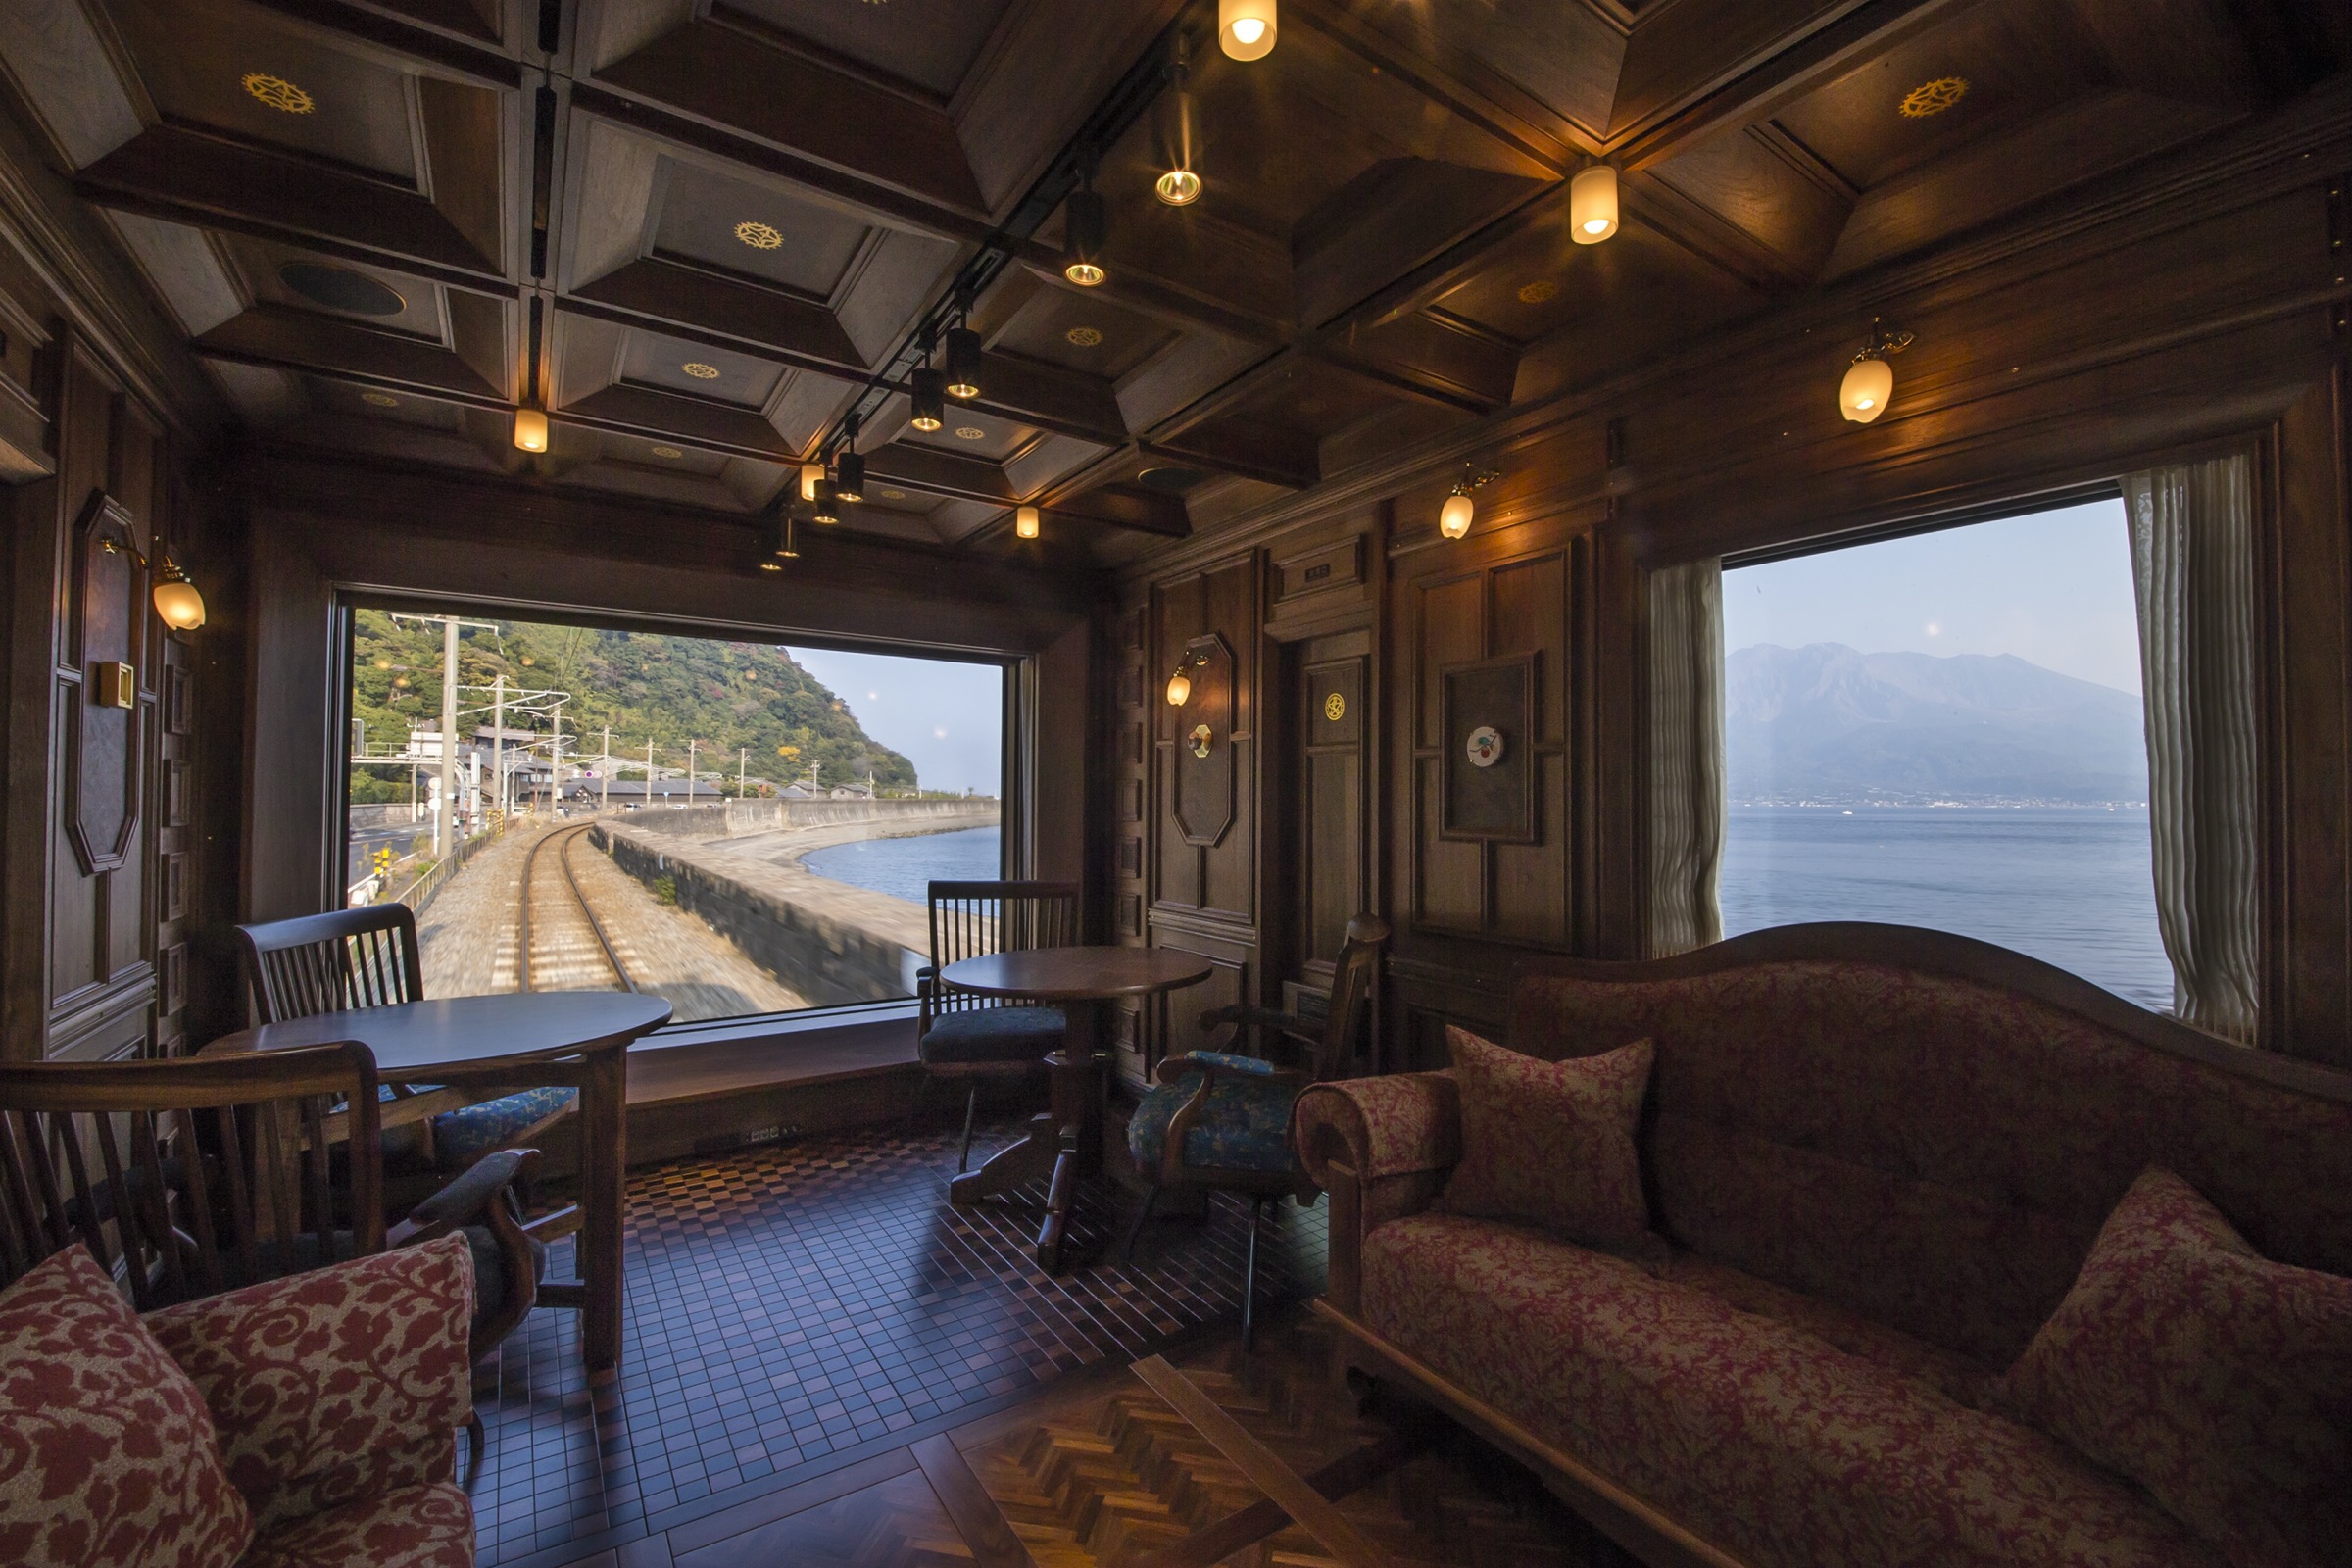 The lounge car on the Seven Stars luxury train. (Courtesy of JR Kyushu)